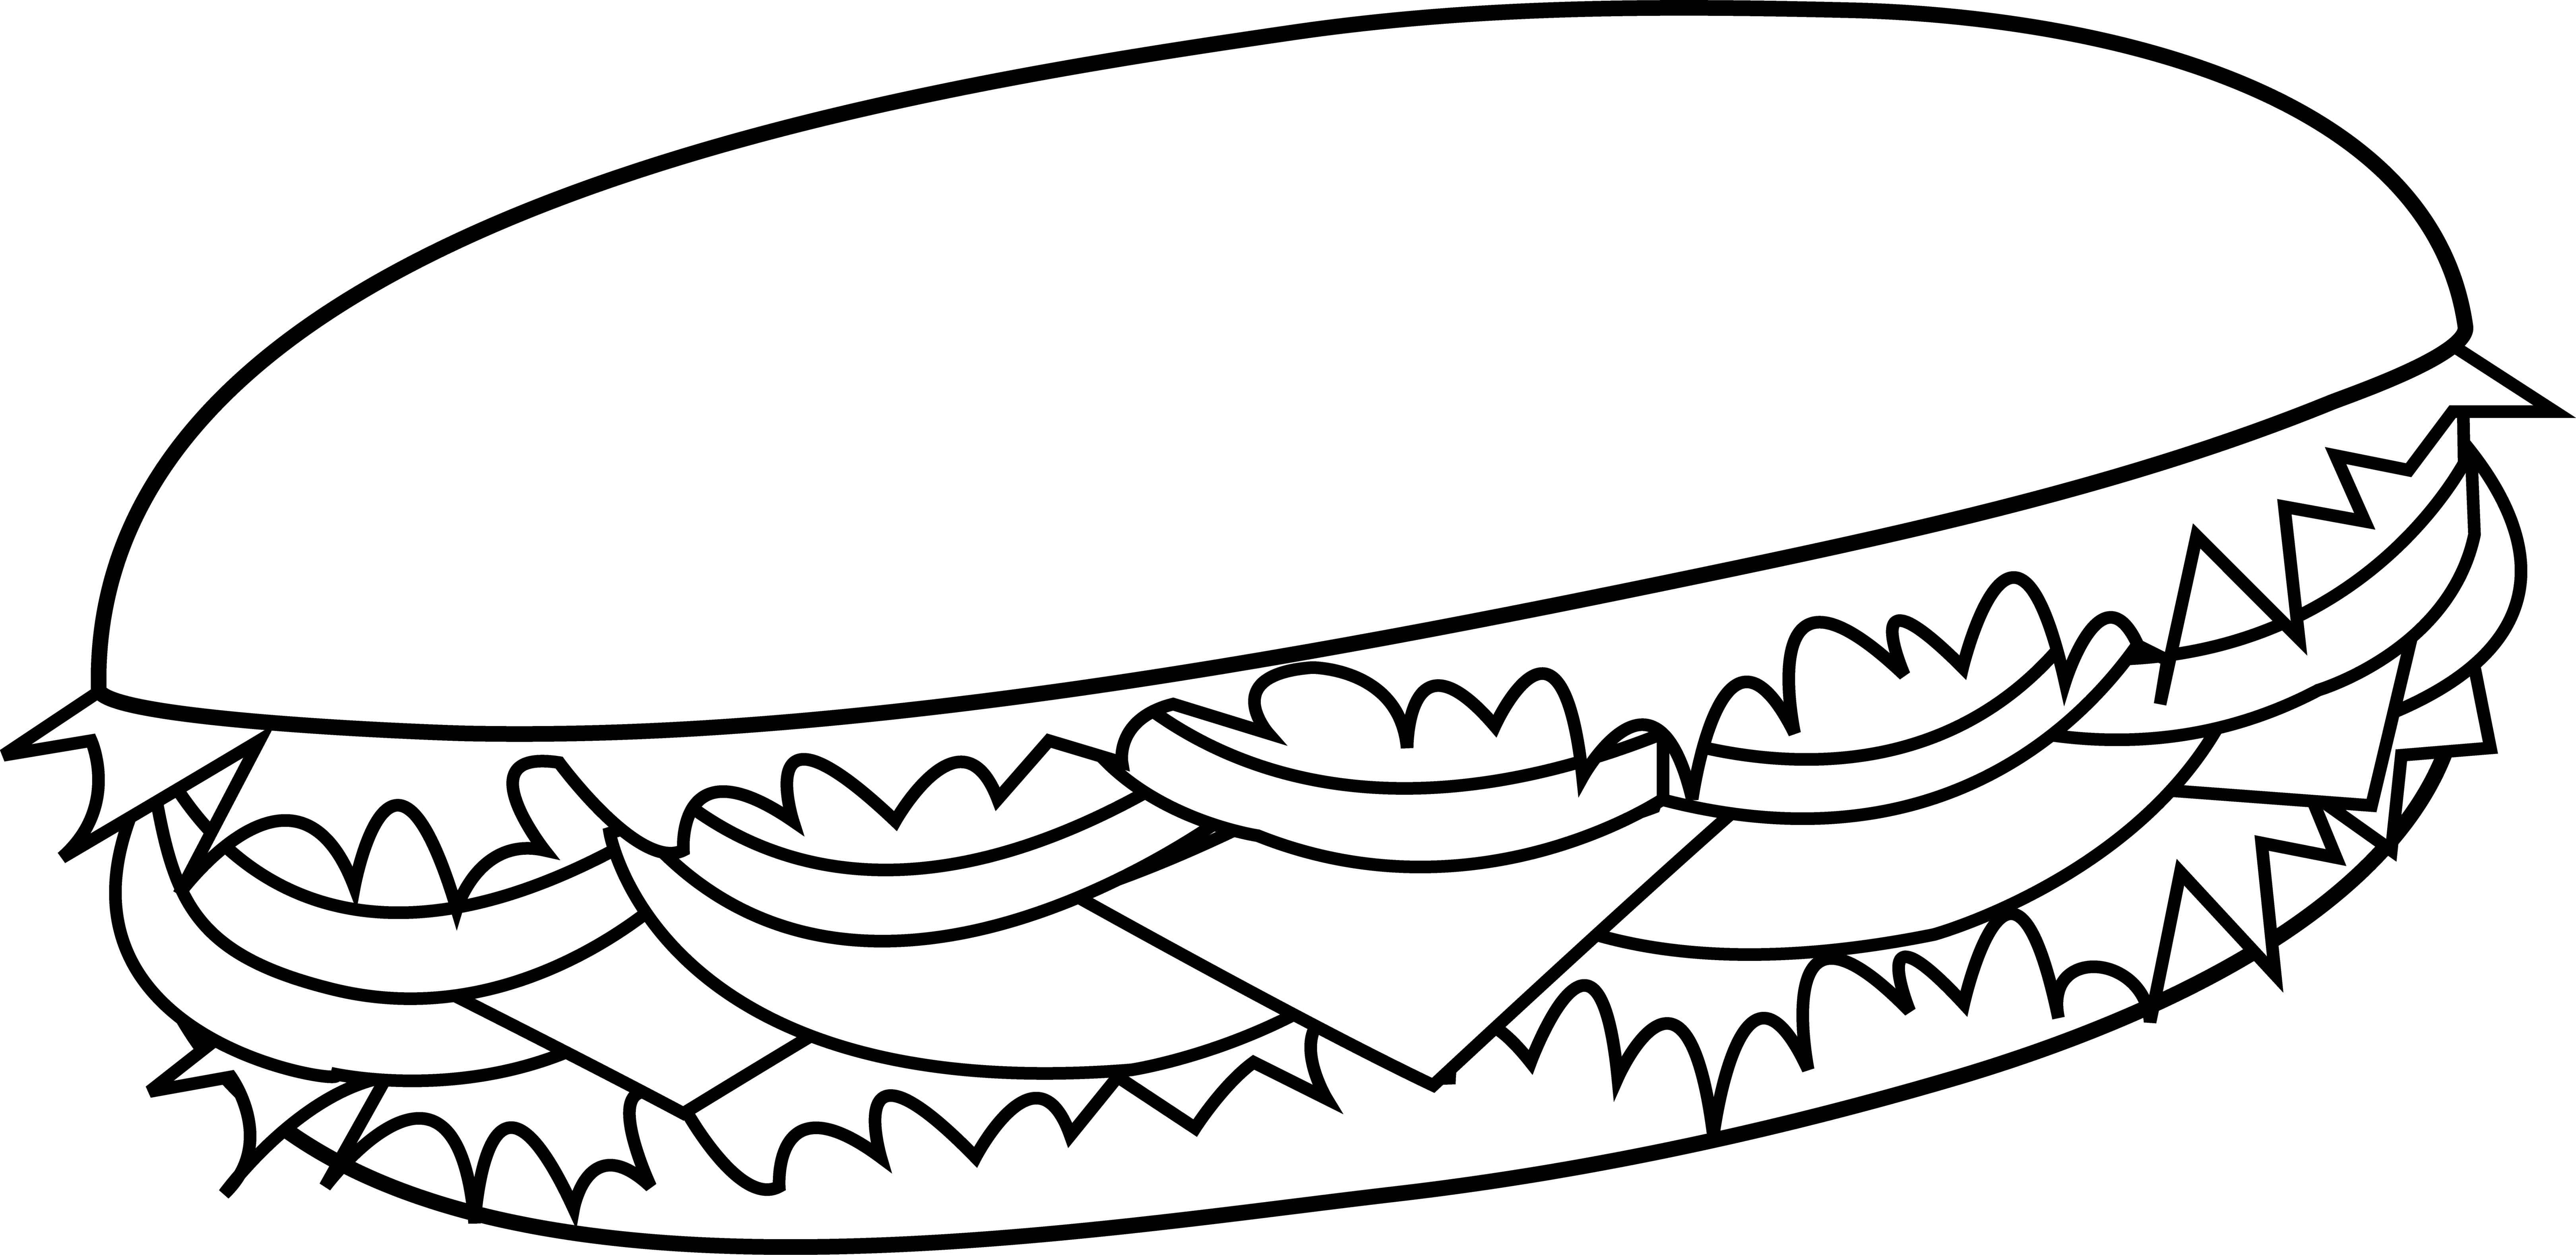 burger clipart black and white